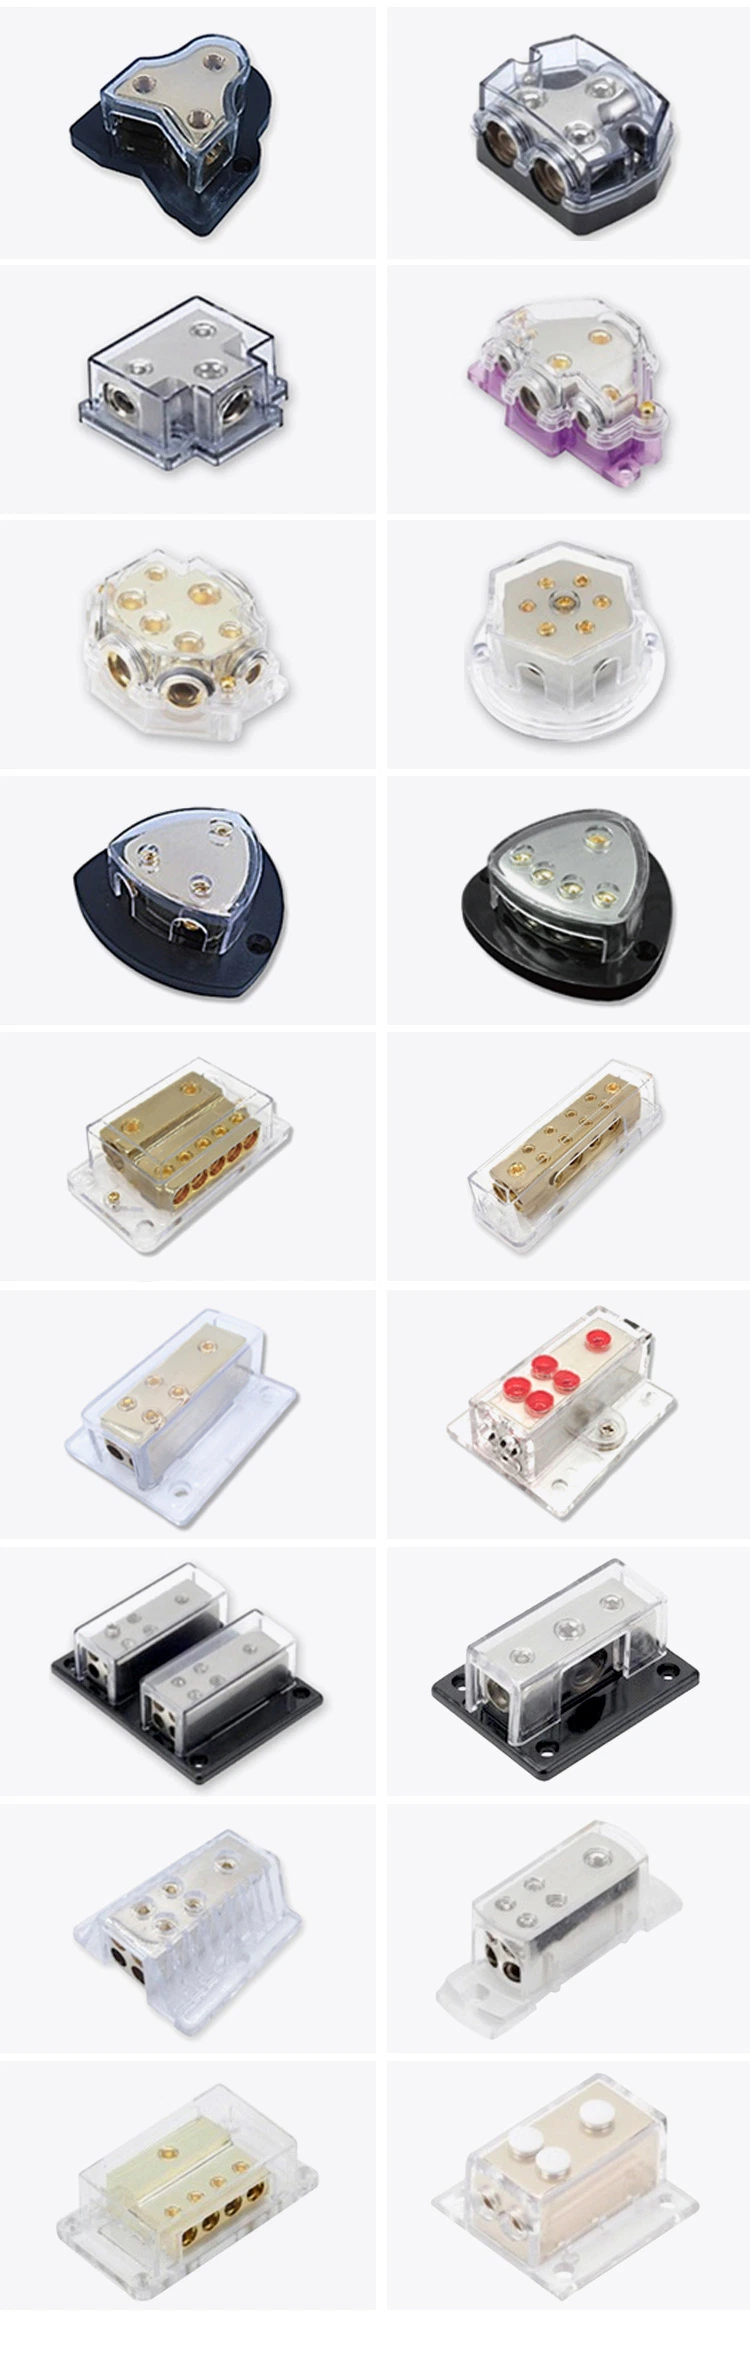 Hot Selling Factory Price Distribution Block Protection Terminals Cable Copper for RV Boat Car Automotive Heavy Duty Stereo